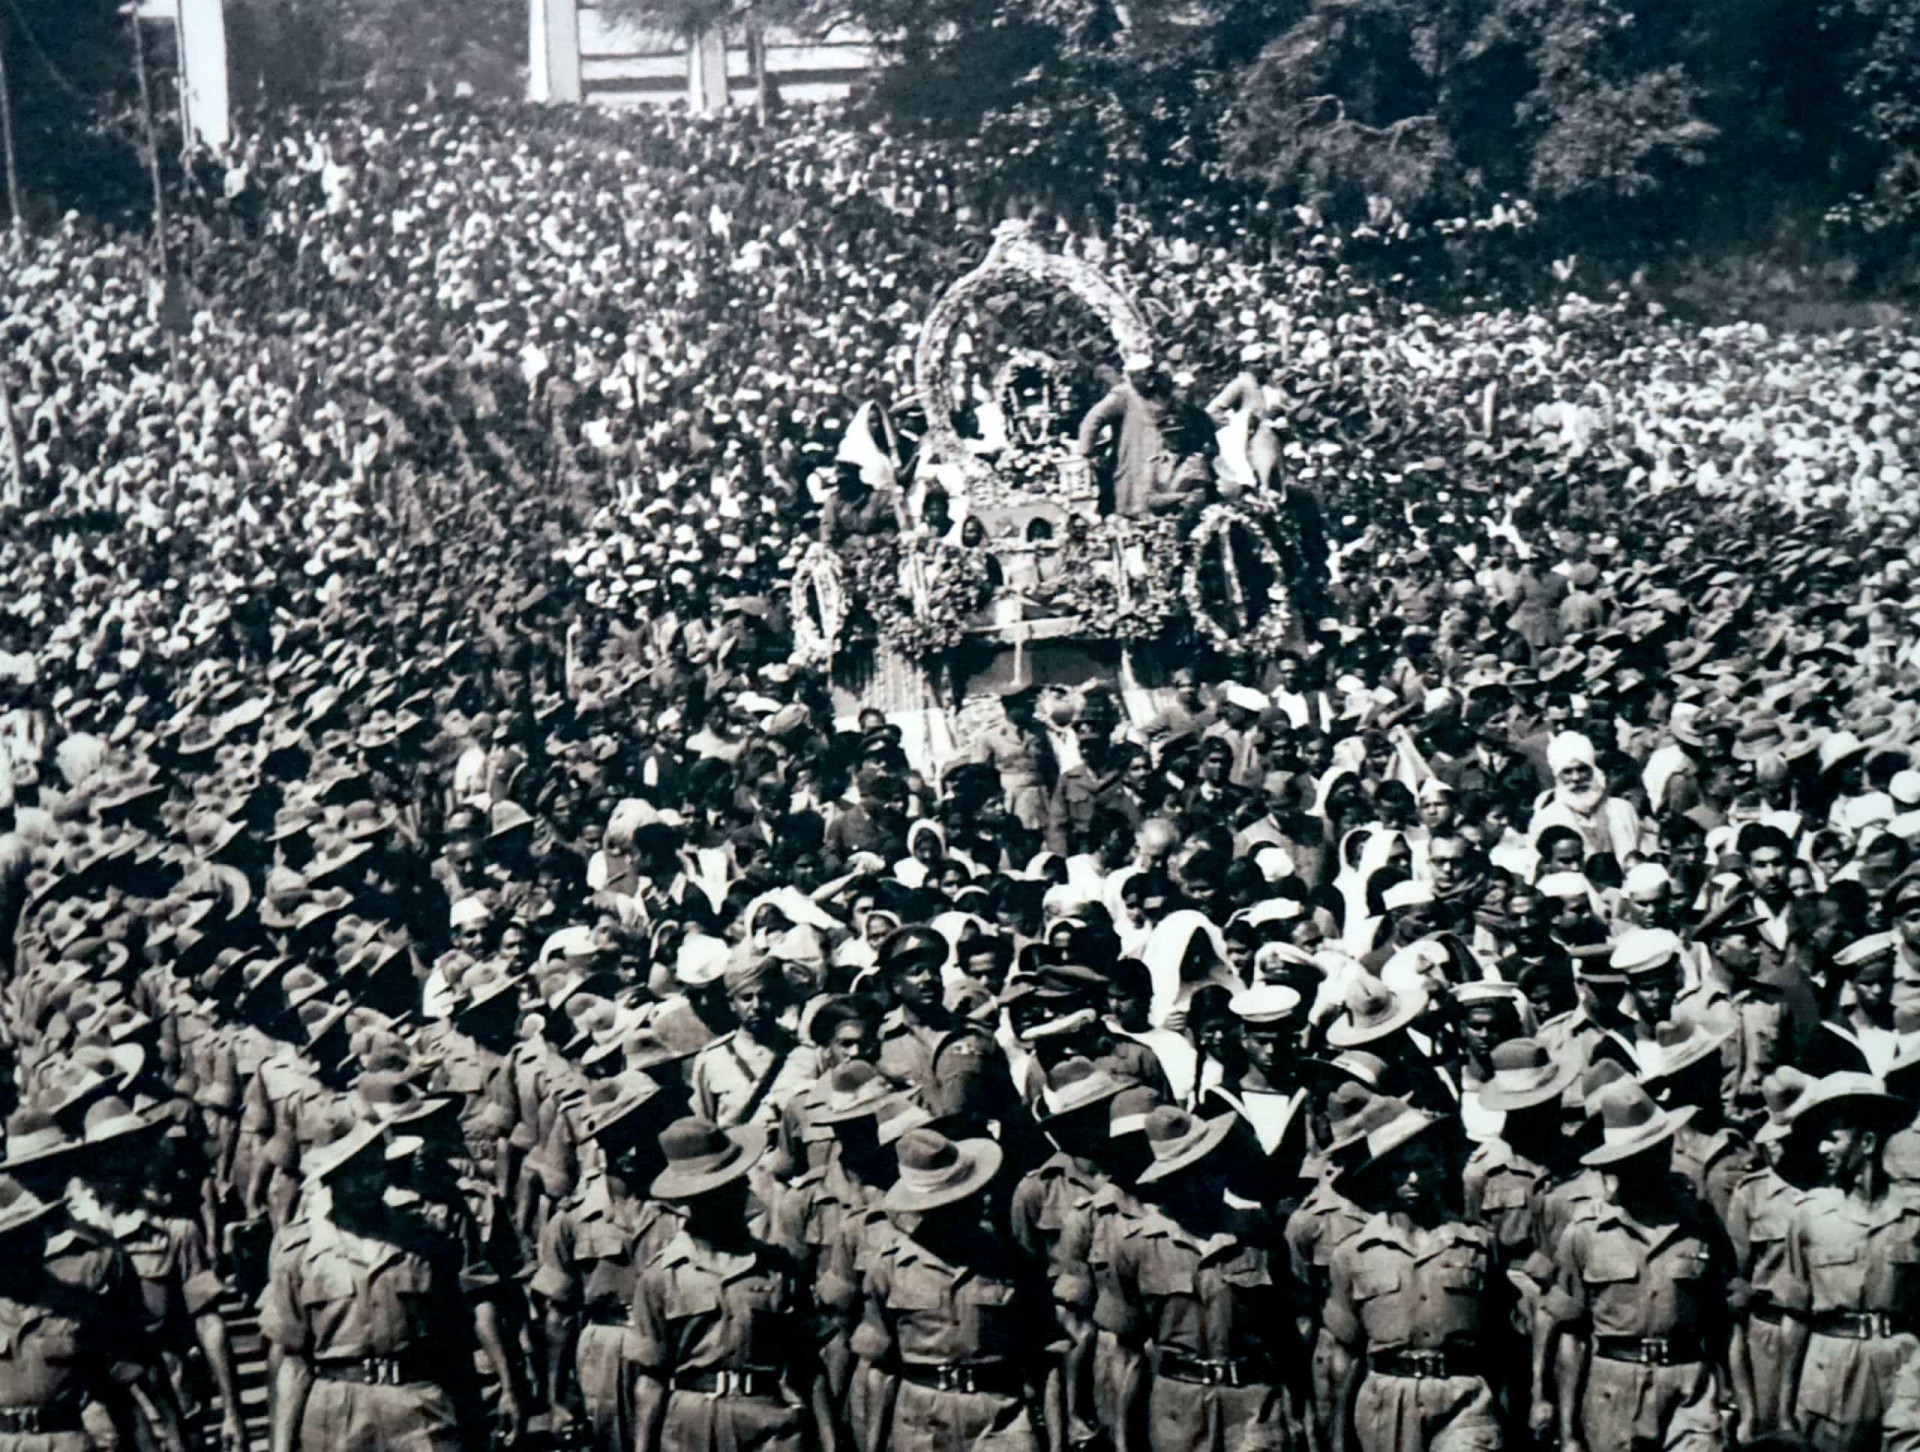 <p>Gandhi's funeral in New Delhi was marked by millions, and his death mourned worldwide. He was cremated in accordance with Hindu tradition. Jawaharlal Nehru became his political heir, and the first Prime Minister of India. </p><p><a href="https://www.msn.com/en-us/community/channel/vid-7xx8mnucu55yw63we9va2gwr7uihbxwc68fxqp25x6tg4ftibpra?cvid=94631541bc0f4f89bfd59158d696ad7e">Follow us and access great exclusive content every day</a></p>